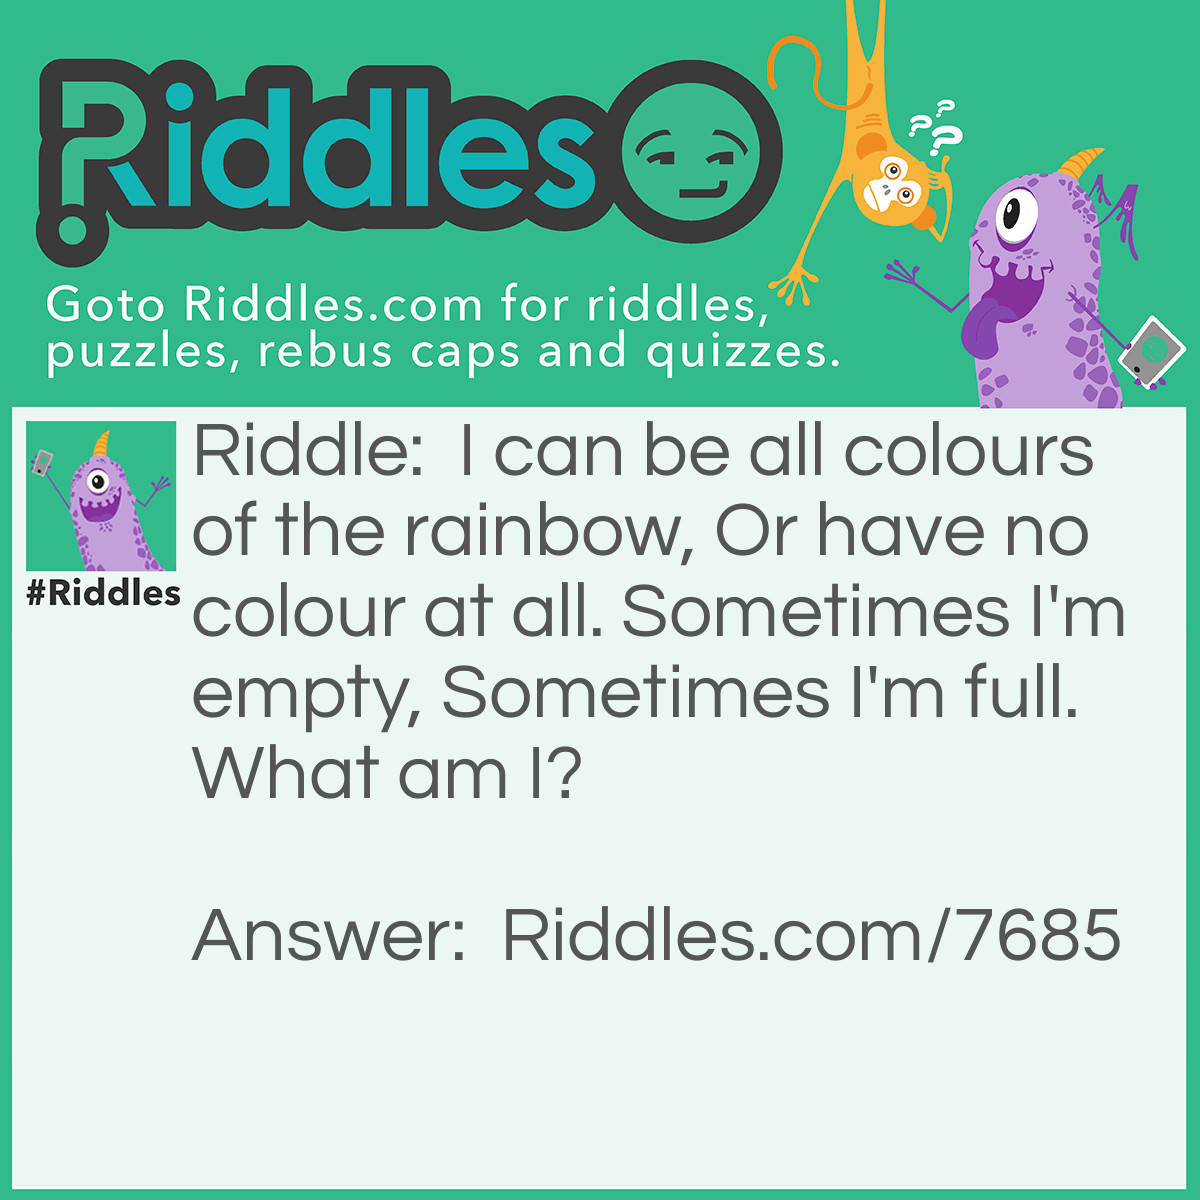 Riddle: I can be all colours of the rainbow, Or have no colour at all. Sometimes I'm empty, Sometimes I'm full. What am I? Answer: Glass.